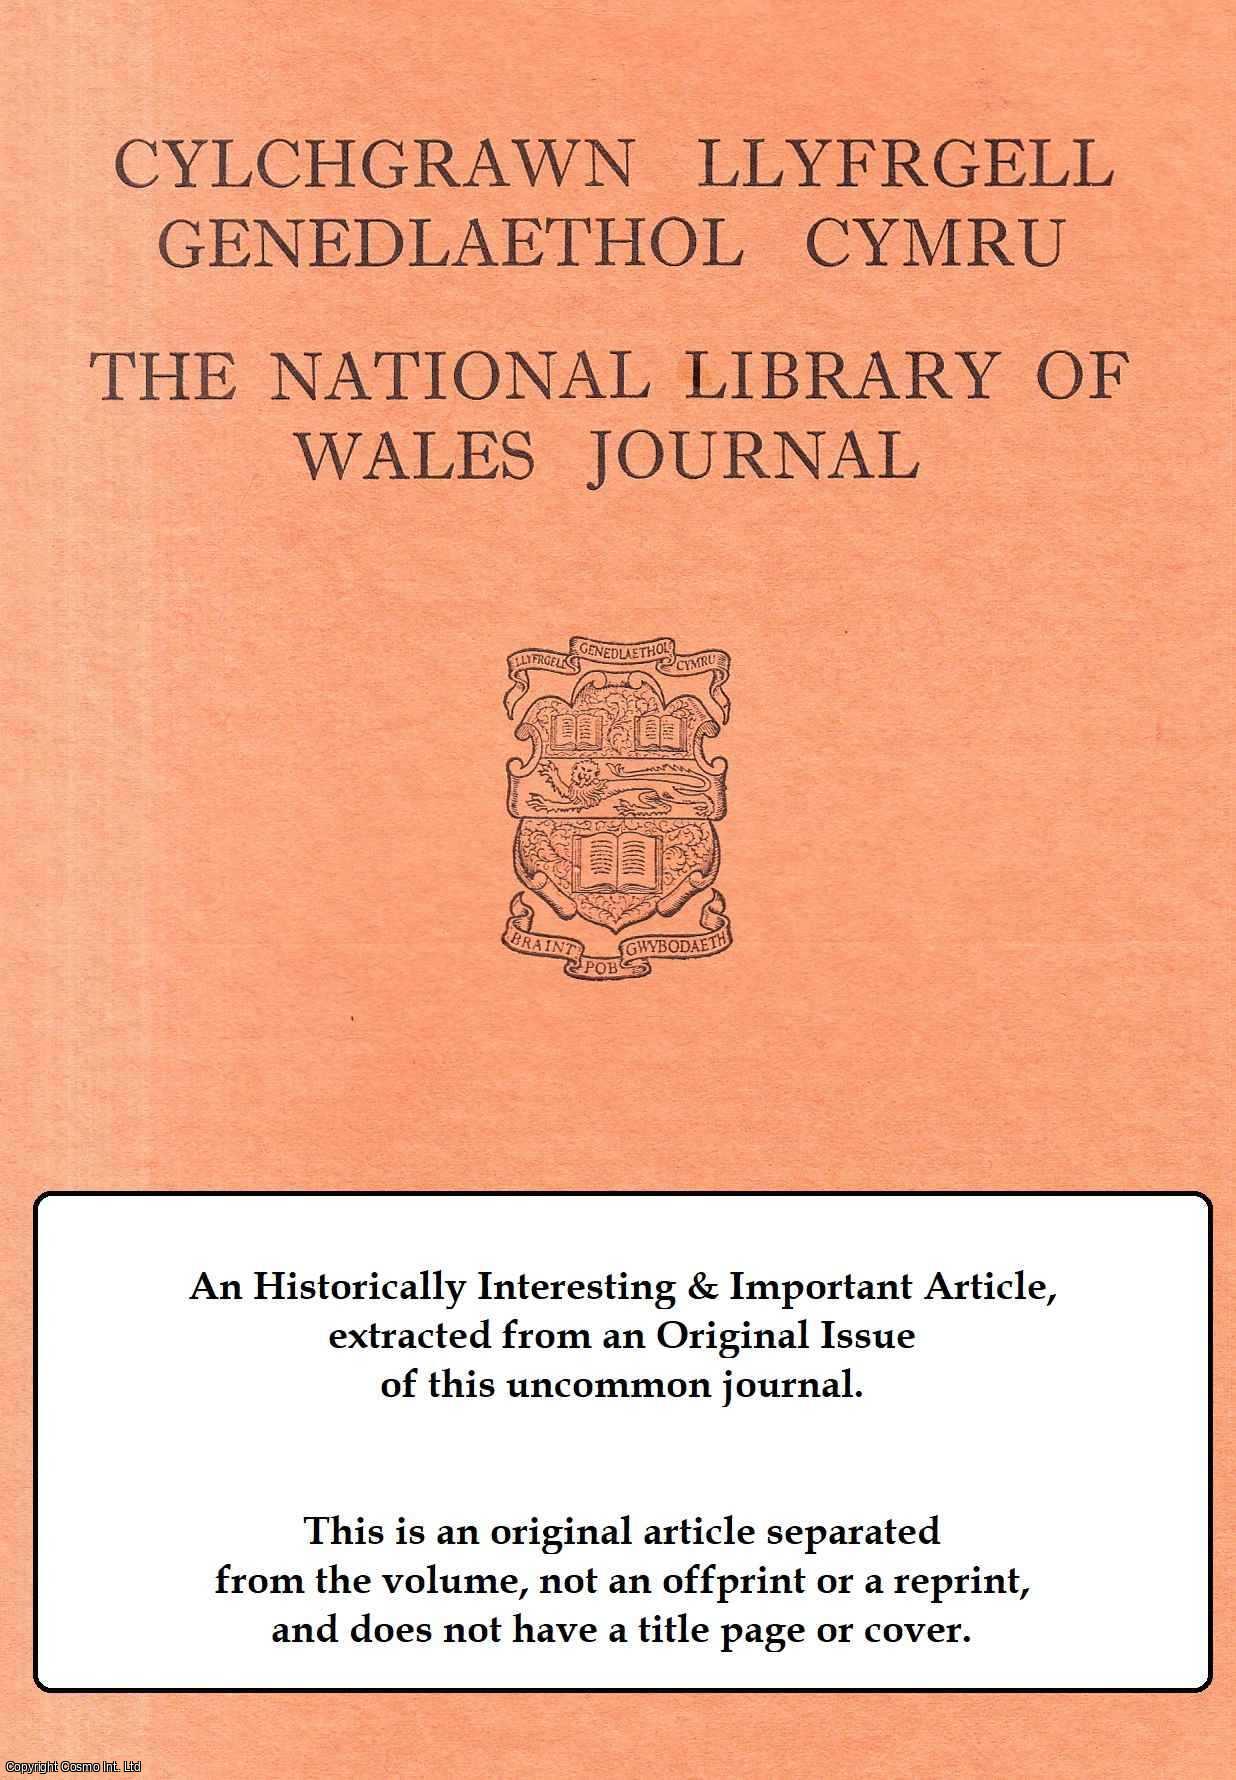 Ieuan Gwynedd Jones - Church Reconstruction in North Cardiganshire in The Nineteenth Century. An original article from The National Library of Wales Journal, 1978.